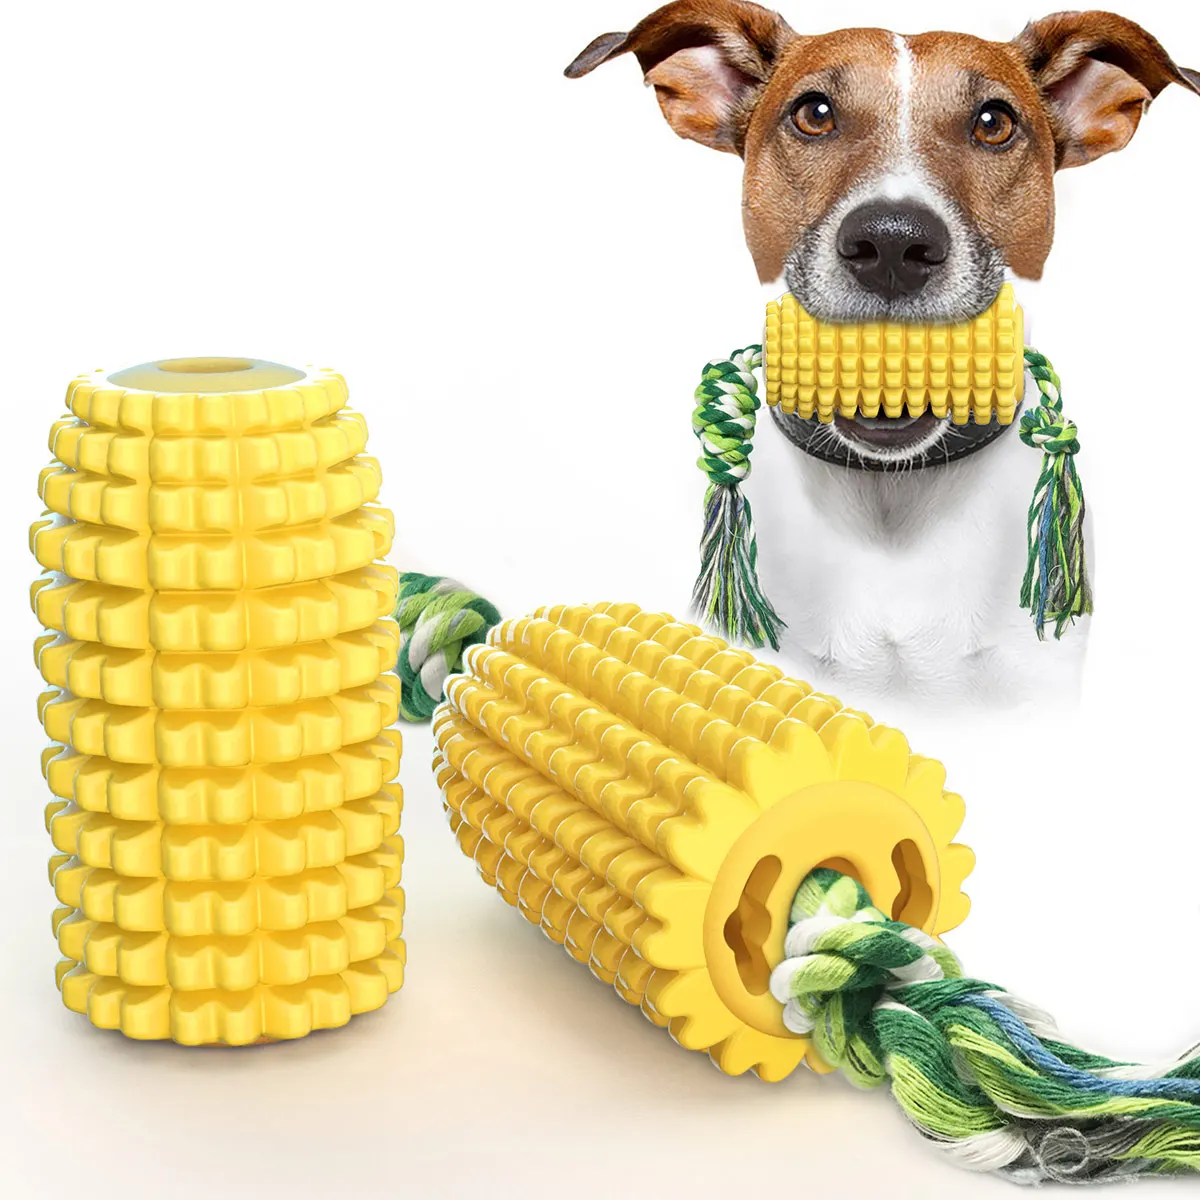 

Amazon Hot Sale Corn Shape Dog Chew Toy Interactive Puppy Chew Toy Bite-Resistant Teeth Clean Pet Dog Toys, Yellow